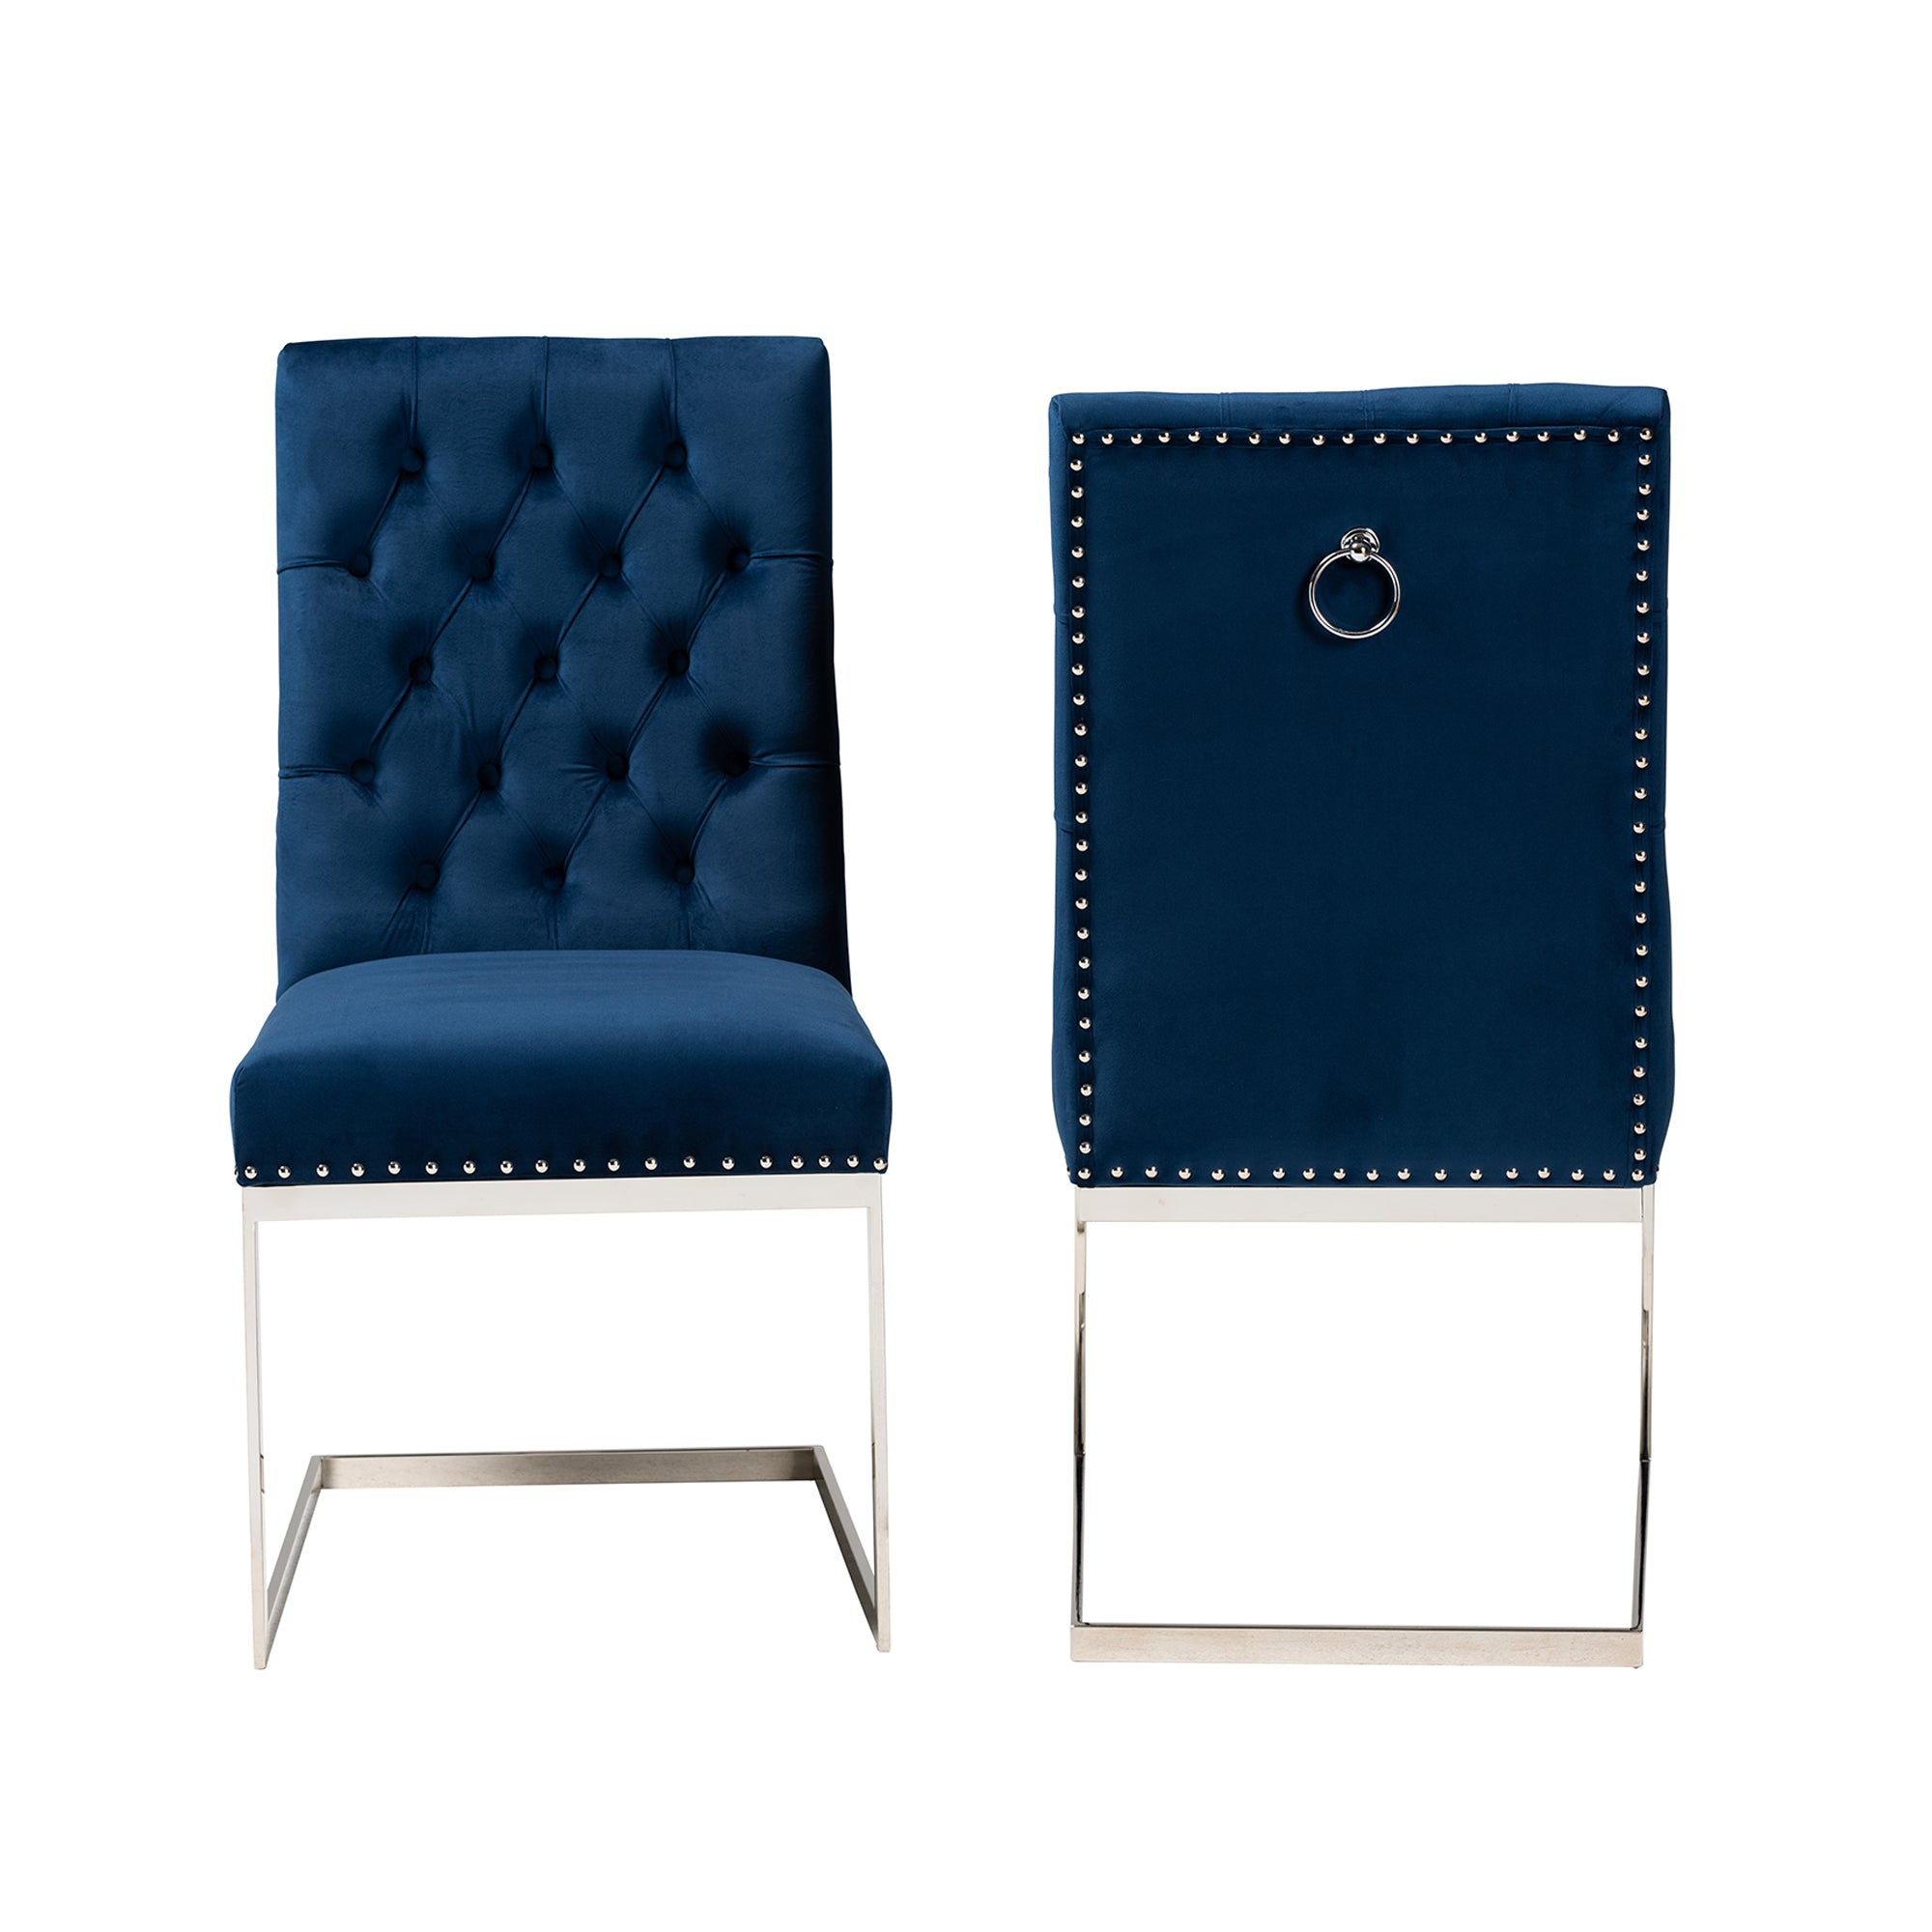 Sherine Glamour Dining Chairs 2-Piece-Dining Chairs-Baxton Studio - WI-Wall2Wall Furnishings